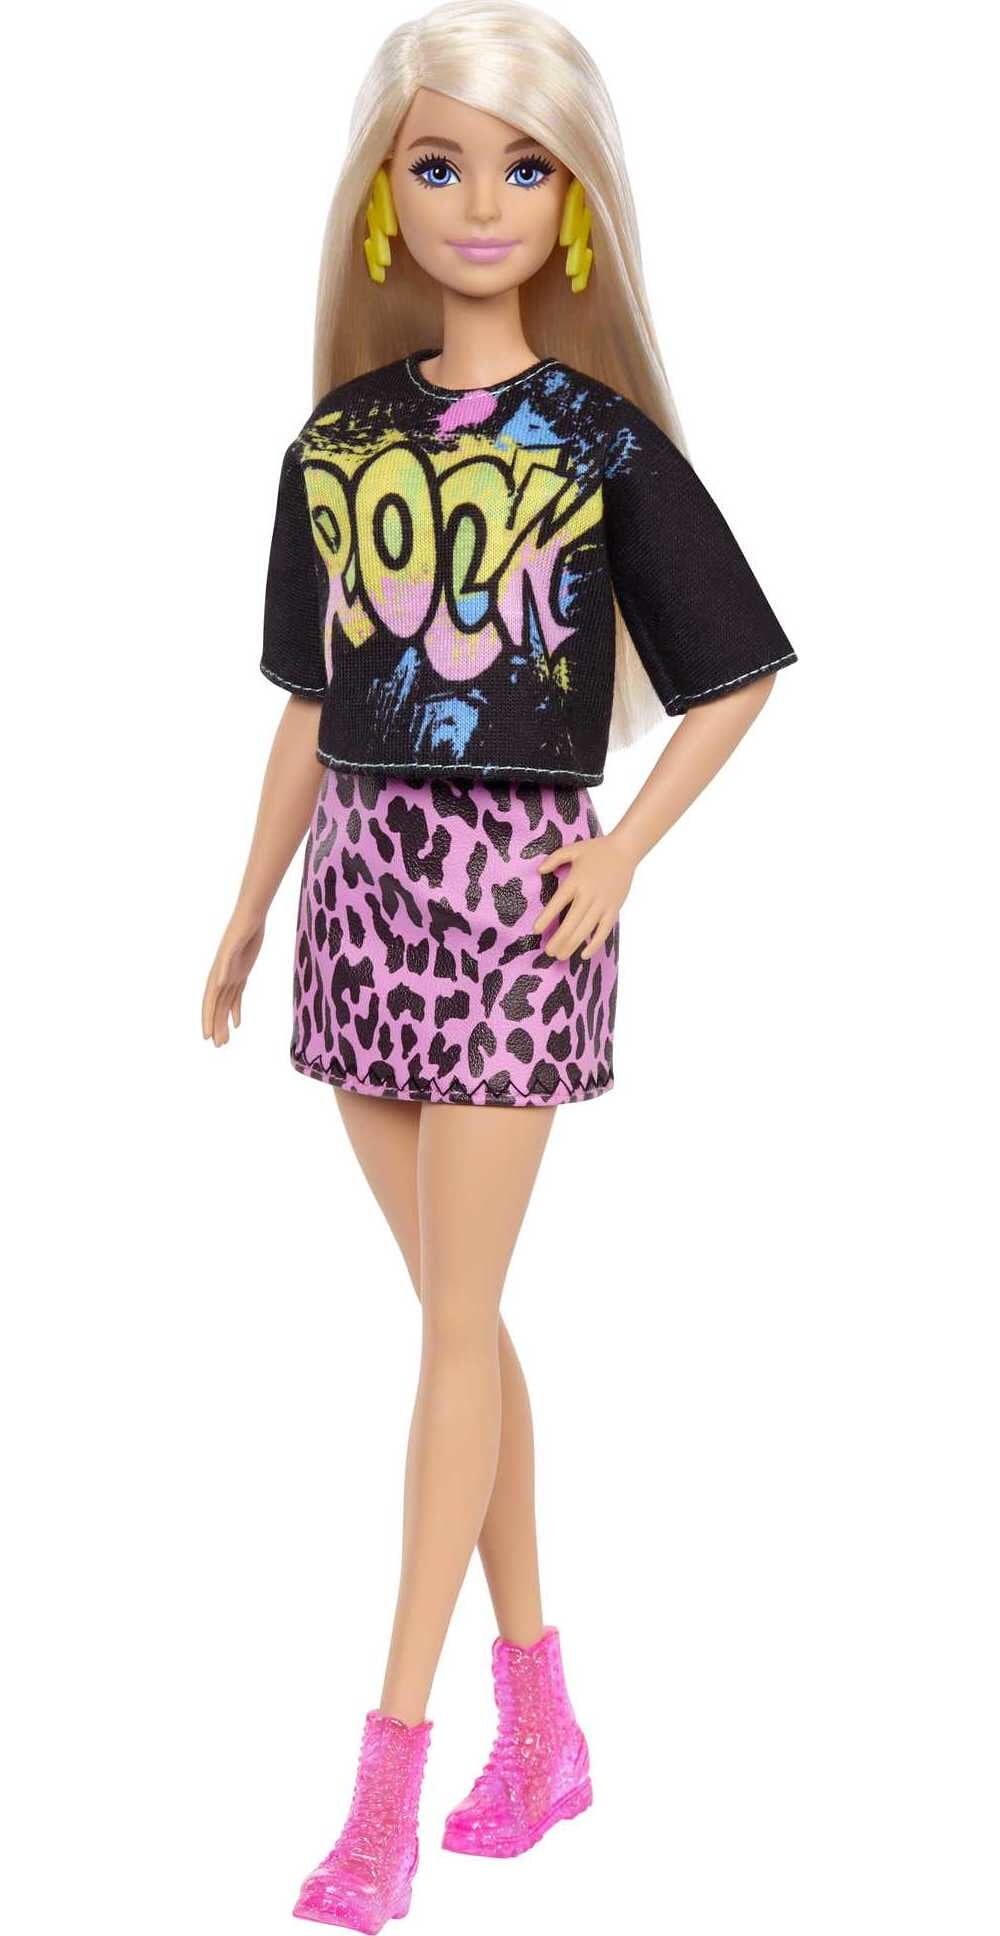 Barbie steps up with flat shoes